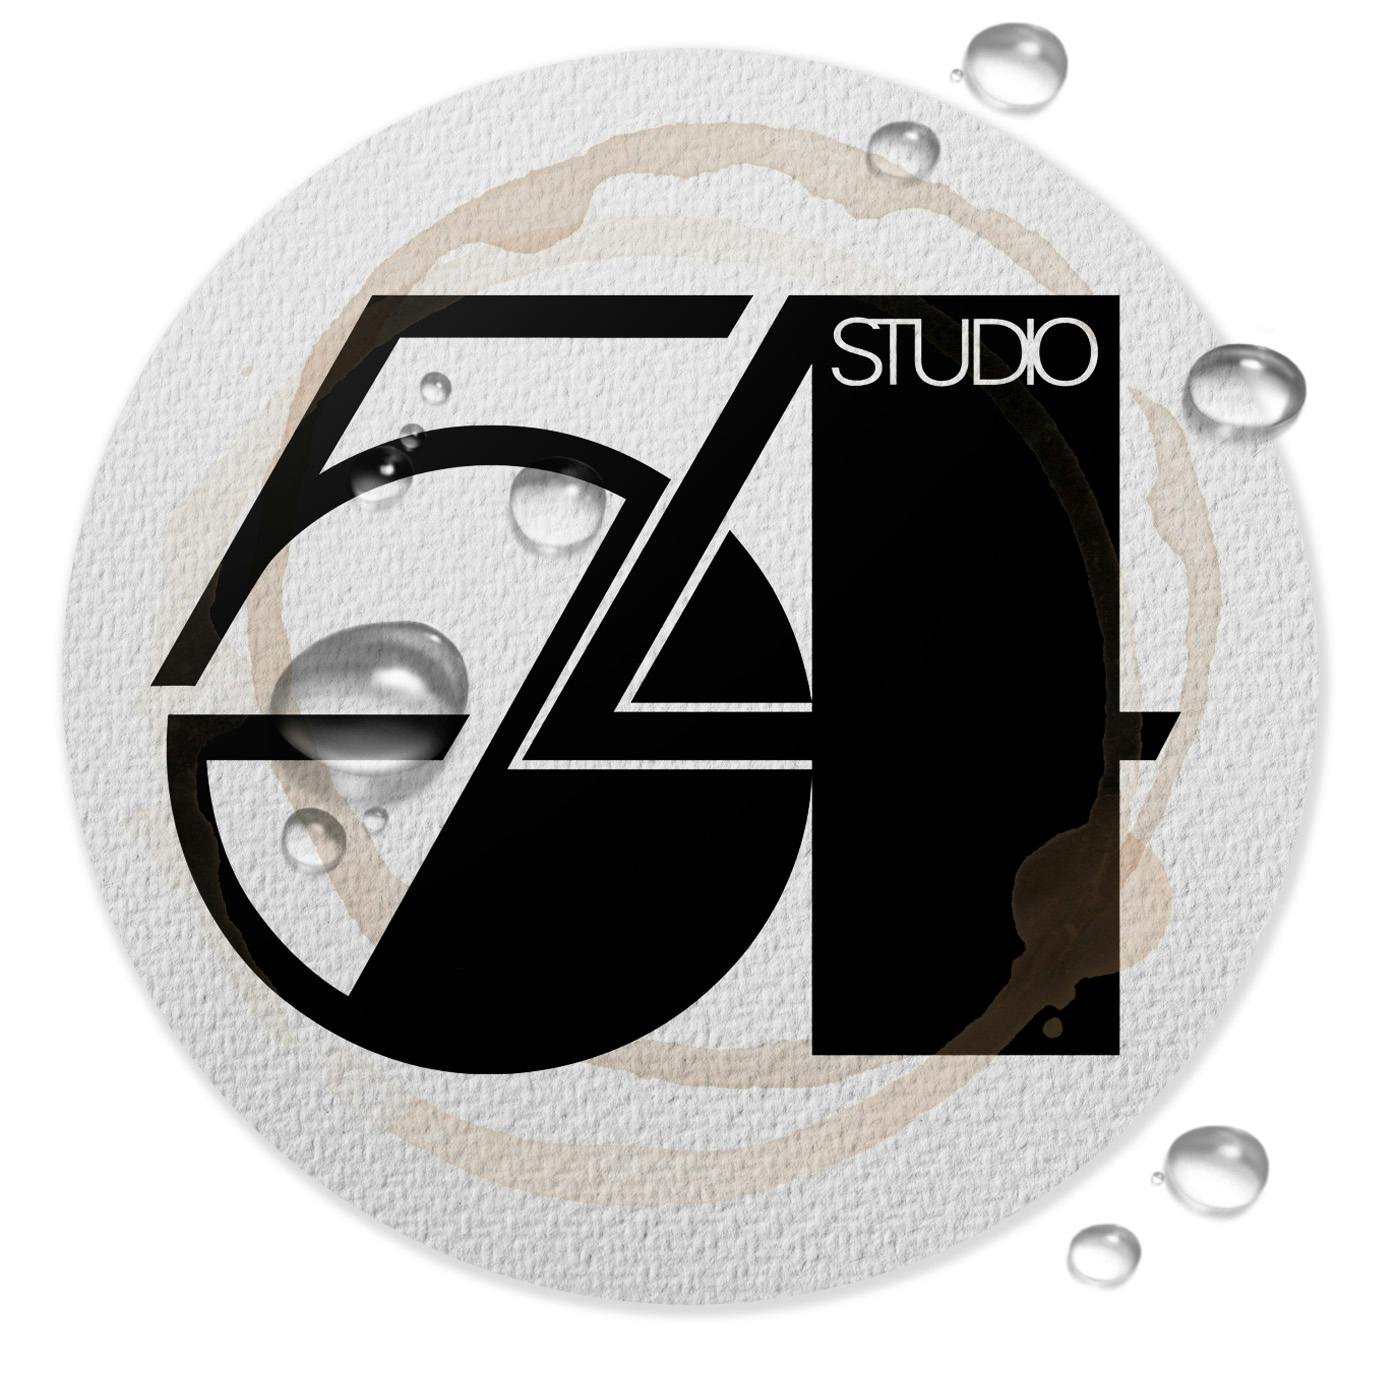 Episode 65: 1979, Disco and the Opening of Studio 54